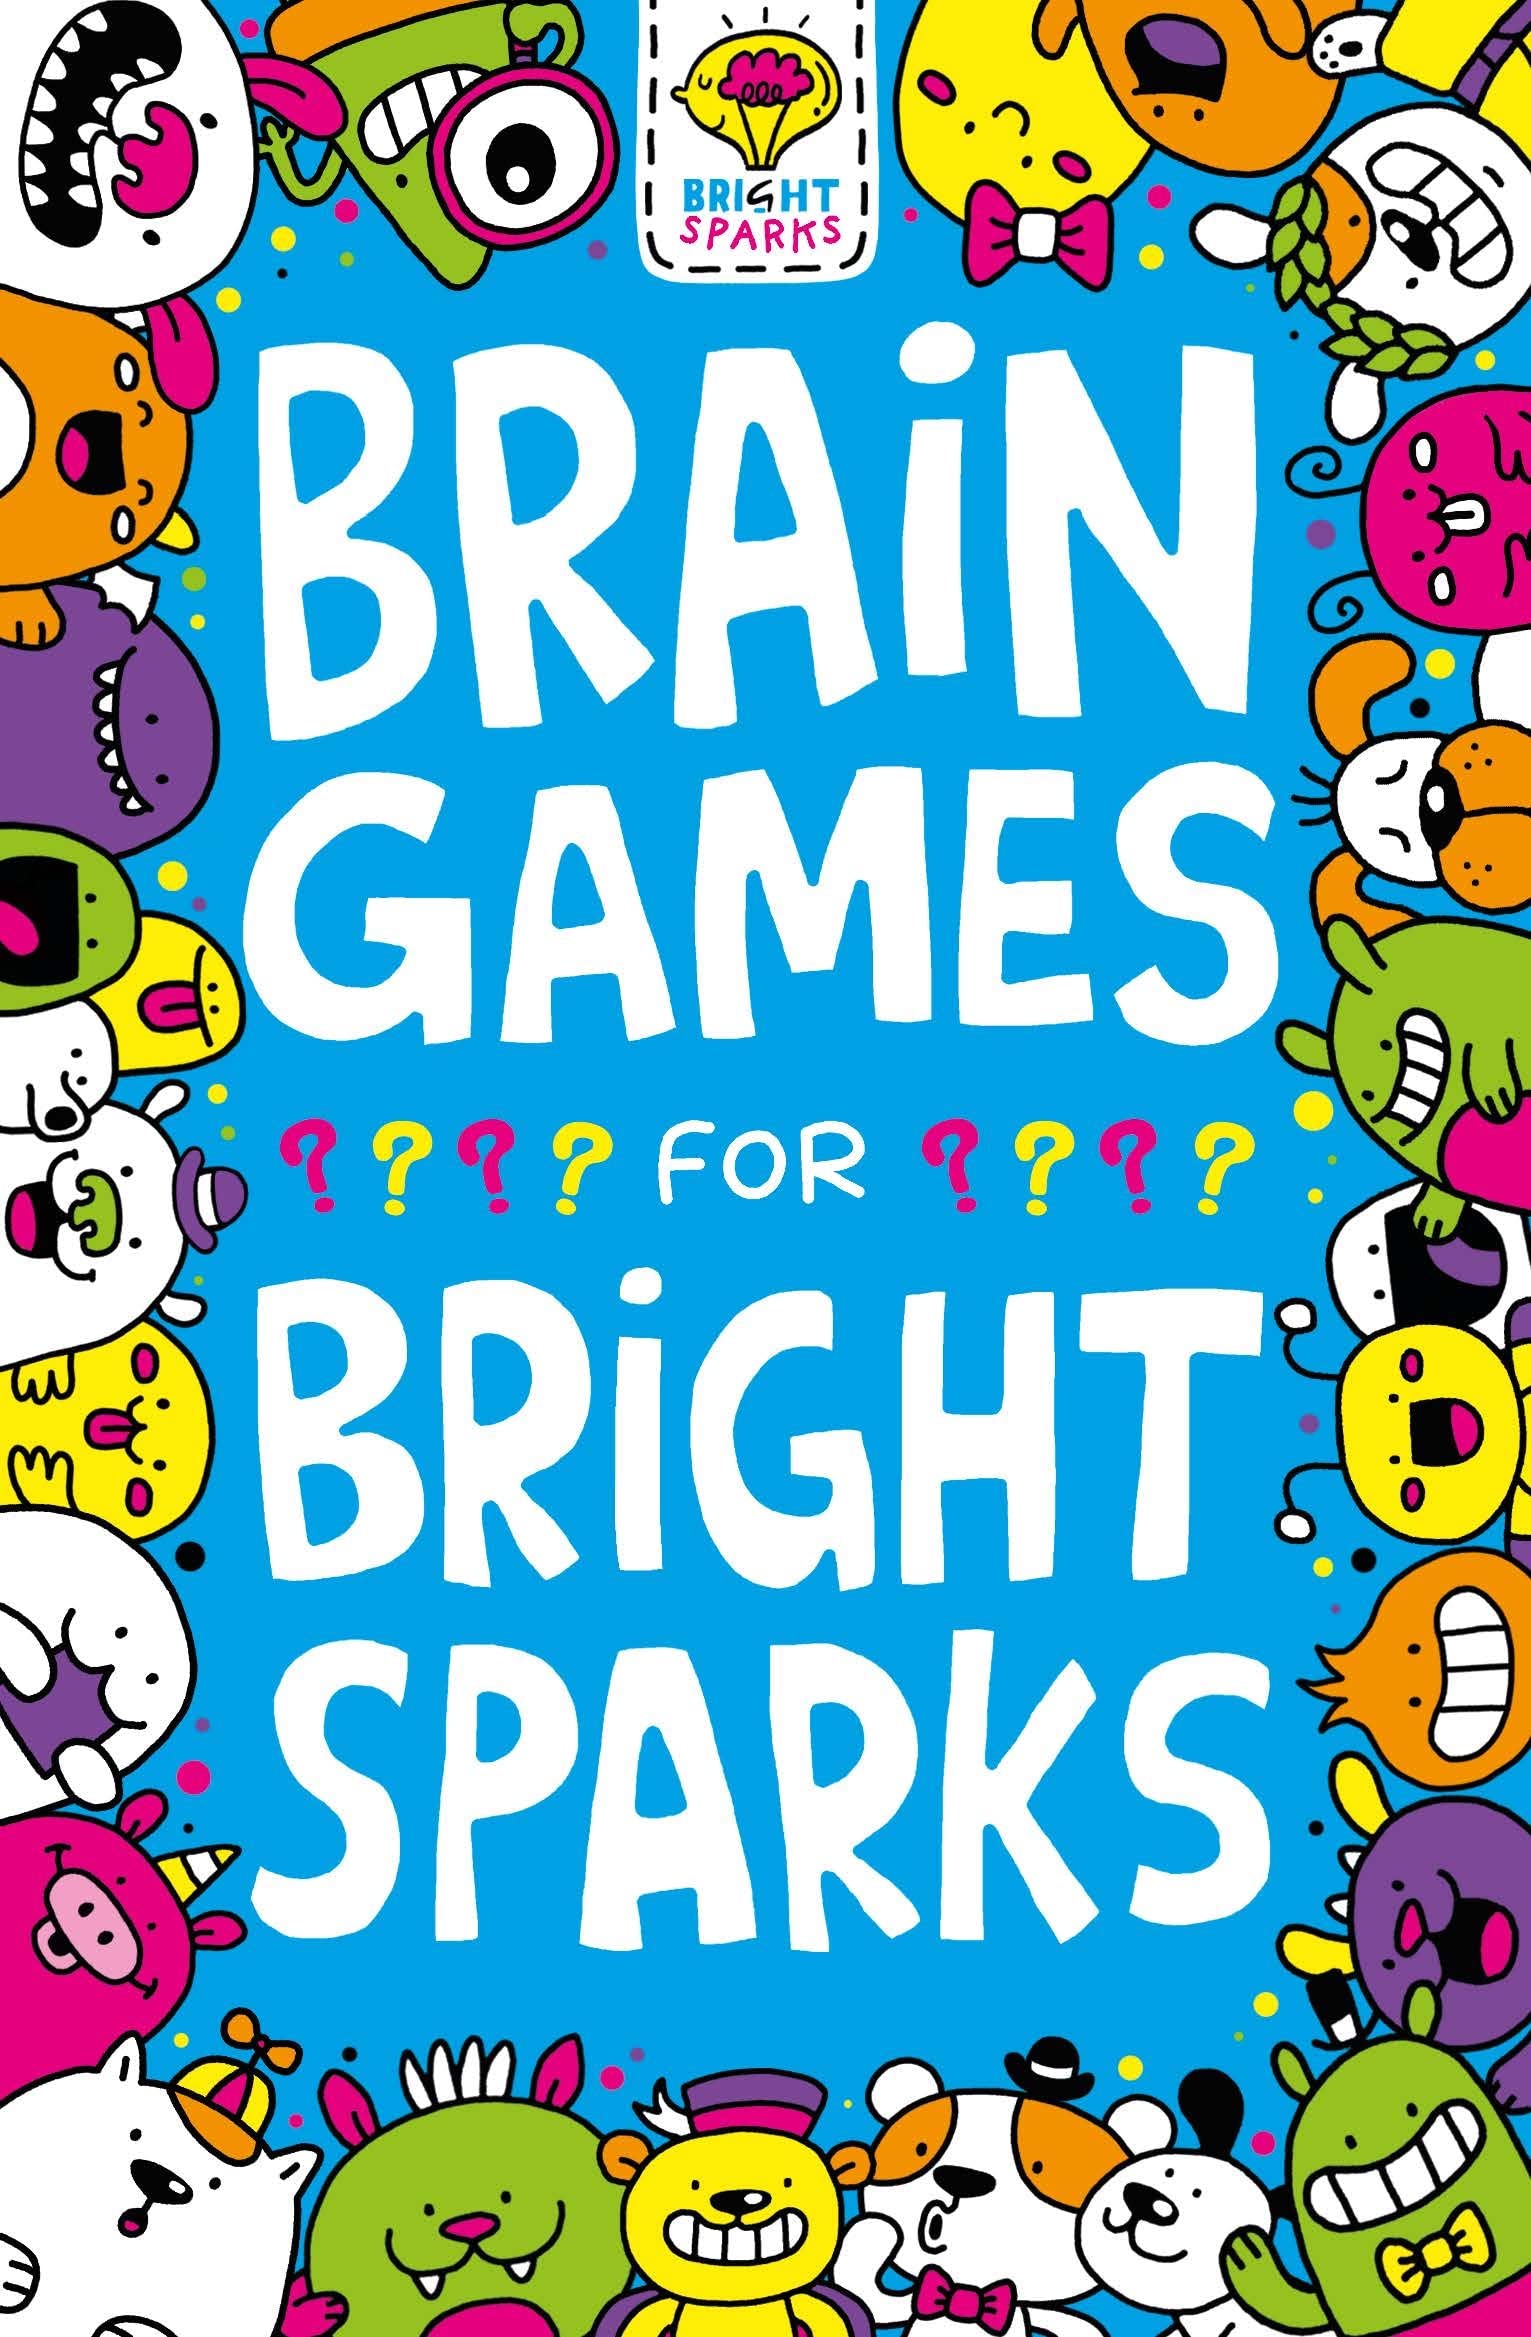 Brain Games for Bright Sparks: Ages 7 to 9